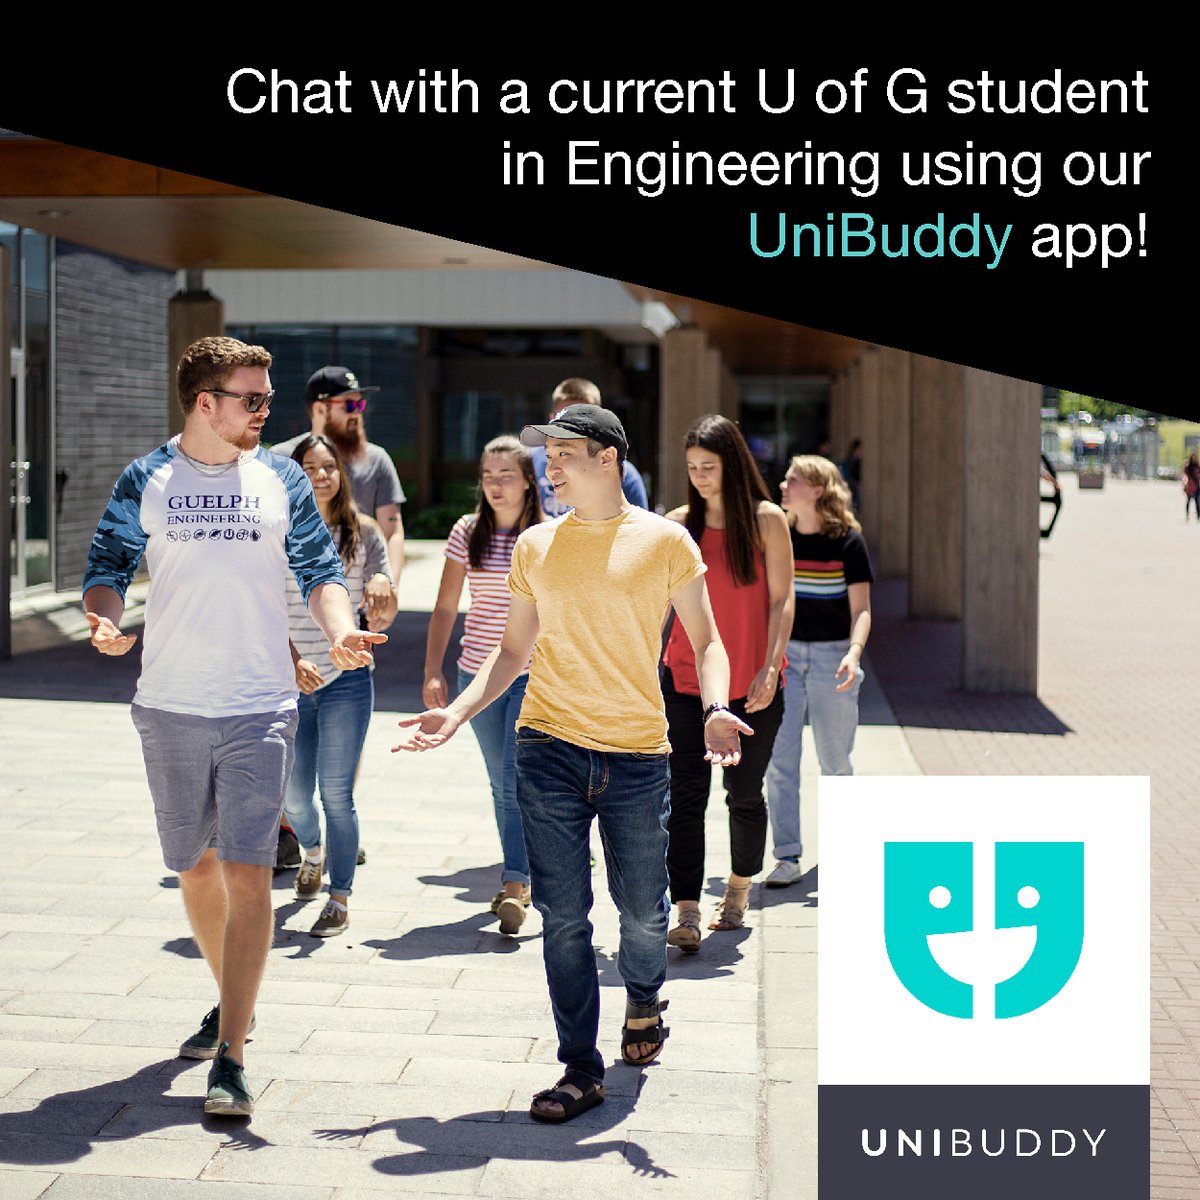 Have questions about student experience? Want to chat with a current Engineering student at U of G? Visit our UniBuddy page to access the app, and start connecting!📱 > 💬 > 💻 🇨🇦 Domestic Students: uoguel.ph/unibuddy 🗺️ International Students: uoguel.ph/unibuddyint